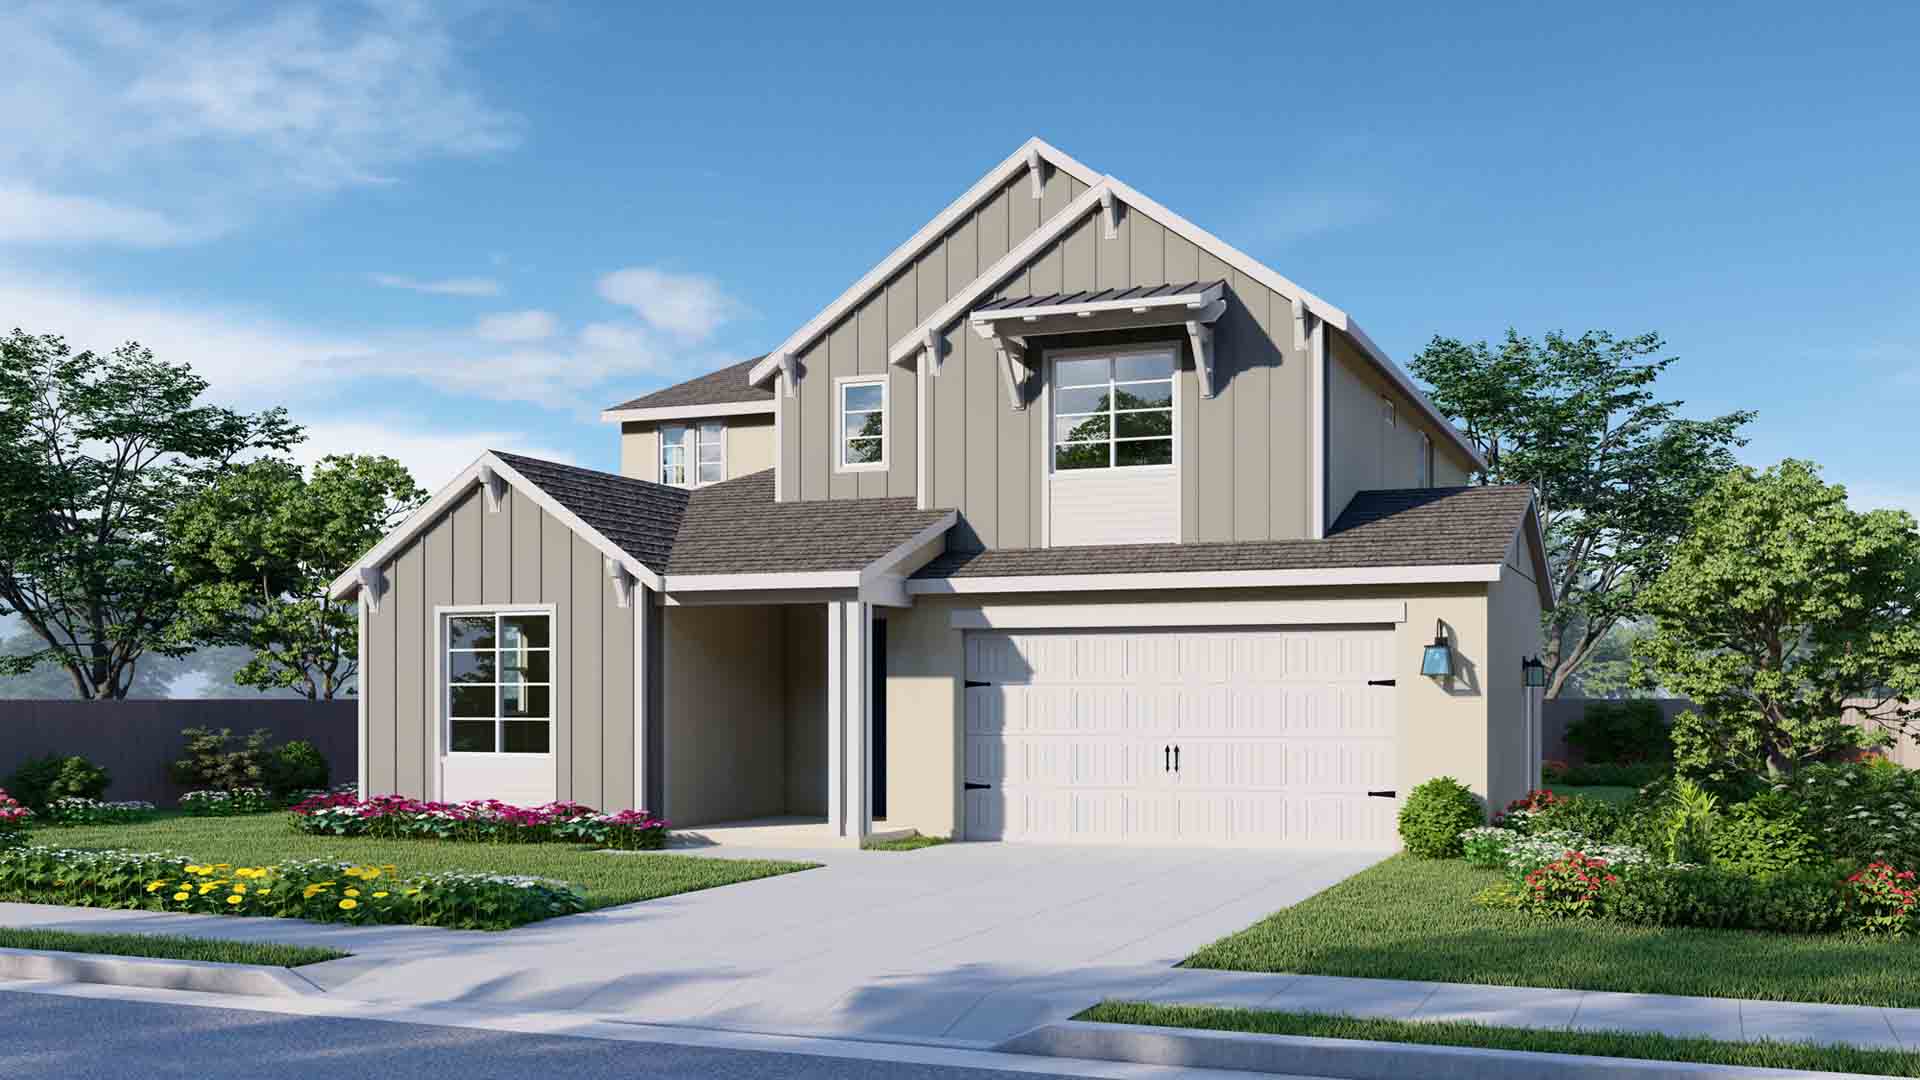 All Elise elevations are two-story homes. The Modern Farmhouse elevation features trim and details that give it a welcoming farmhouse look. The model pictured has light gray vertical siding on both the lower and upper floors, with white trim. The garage door is white and has paneling and metal accents that give it an elevated look.